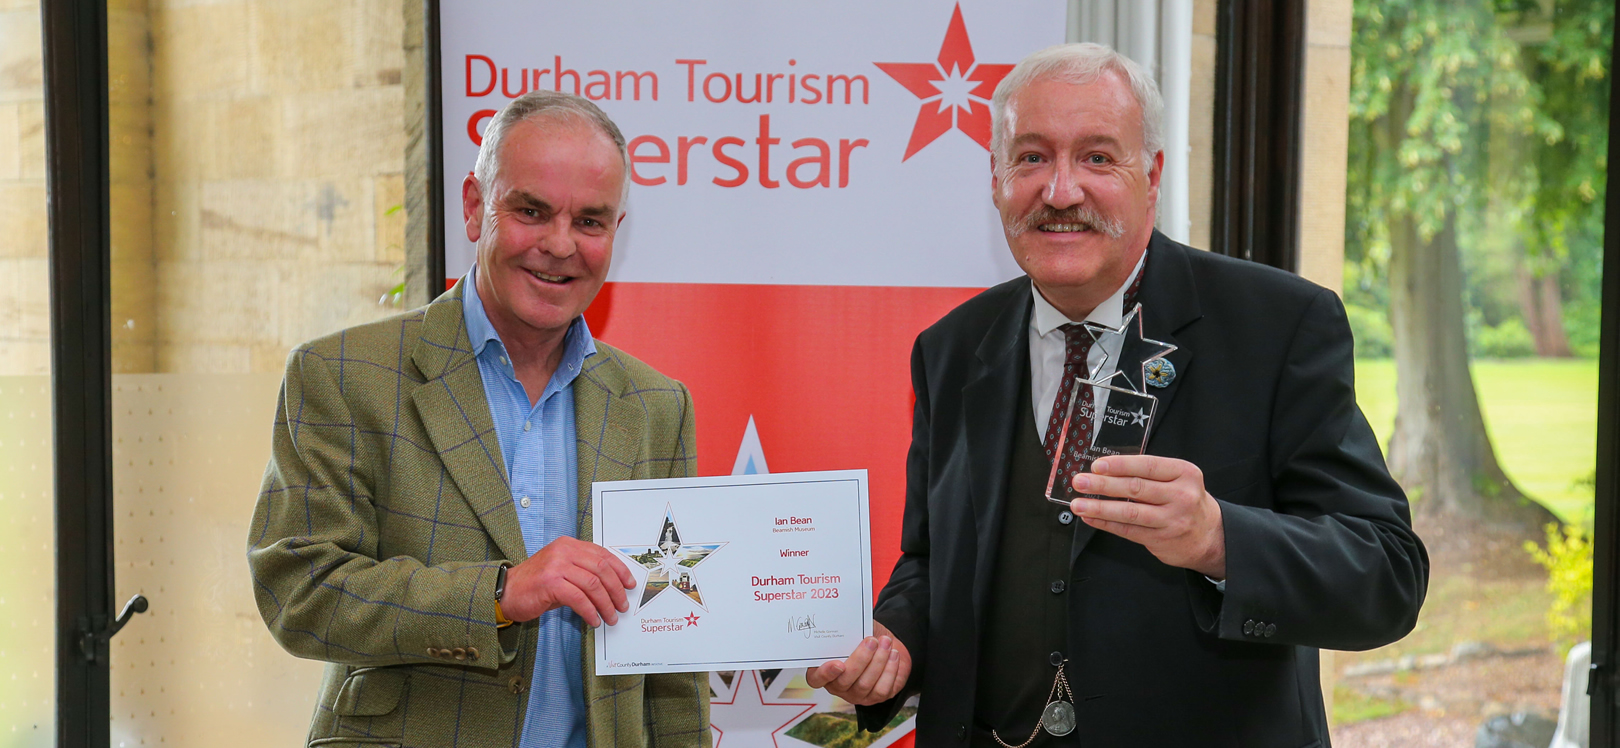 Duncan Peake (Left), Interim Chair of Visit County Durham, with Durham Tourism Superstar 2023 winner Ian Bean, of Beamish, The Living Museum of the North